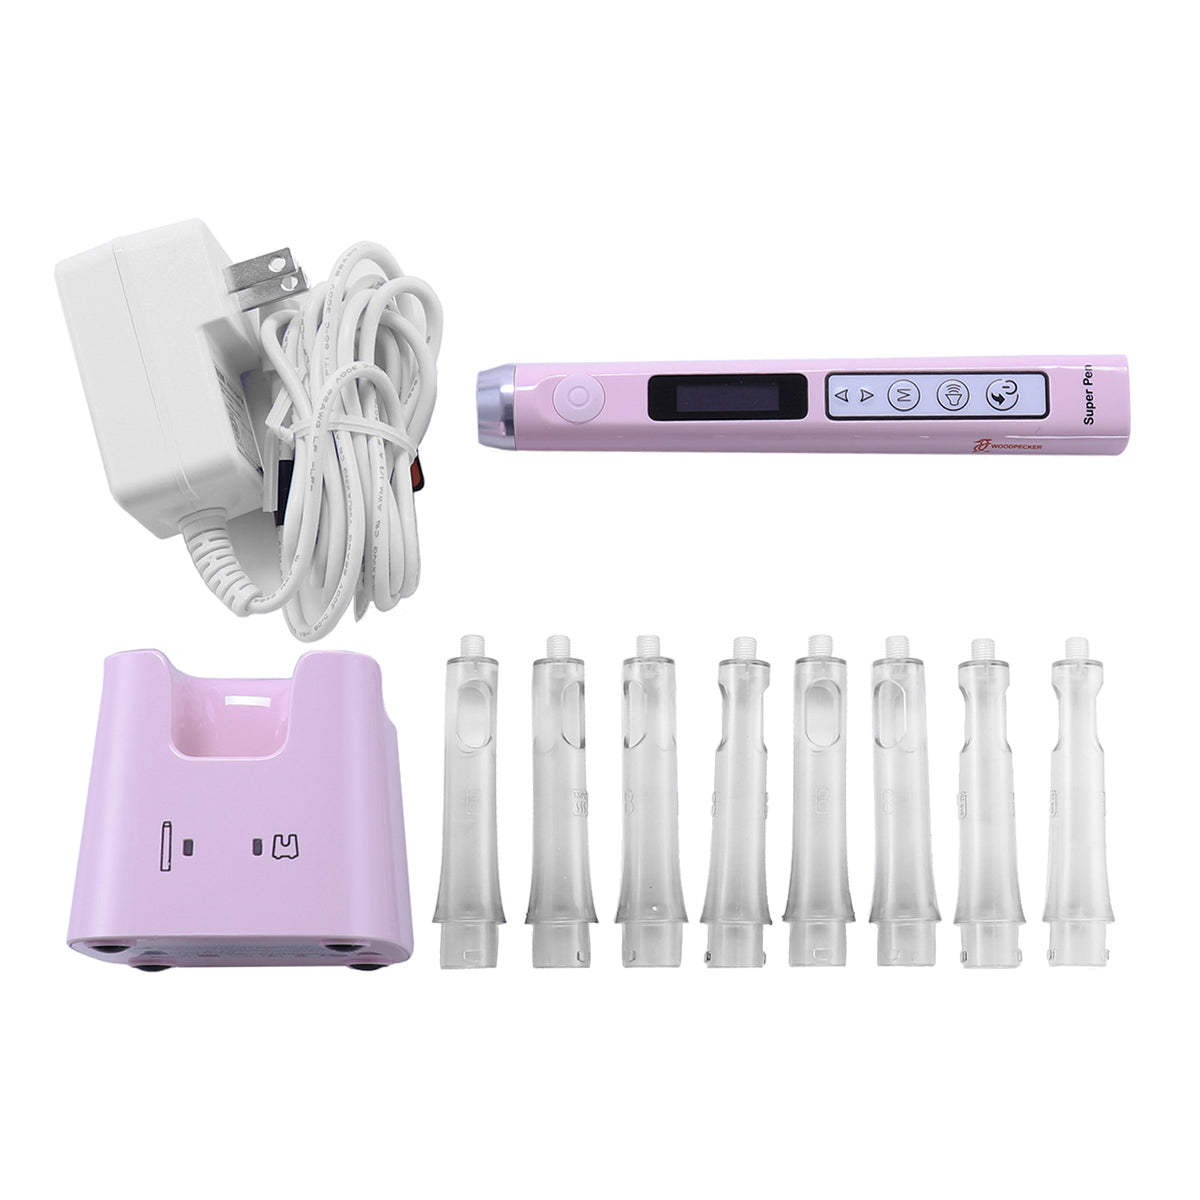 Woodpecker Super Pen Electronic Anesthesia Delivery Syringe System - azdentall.com